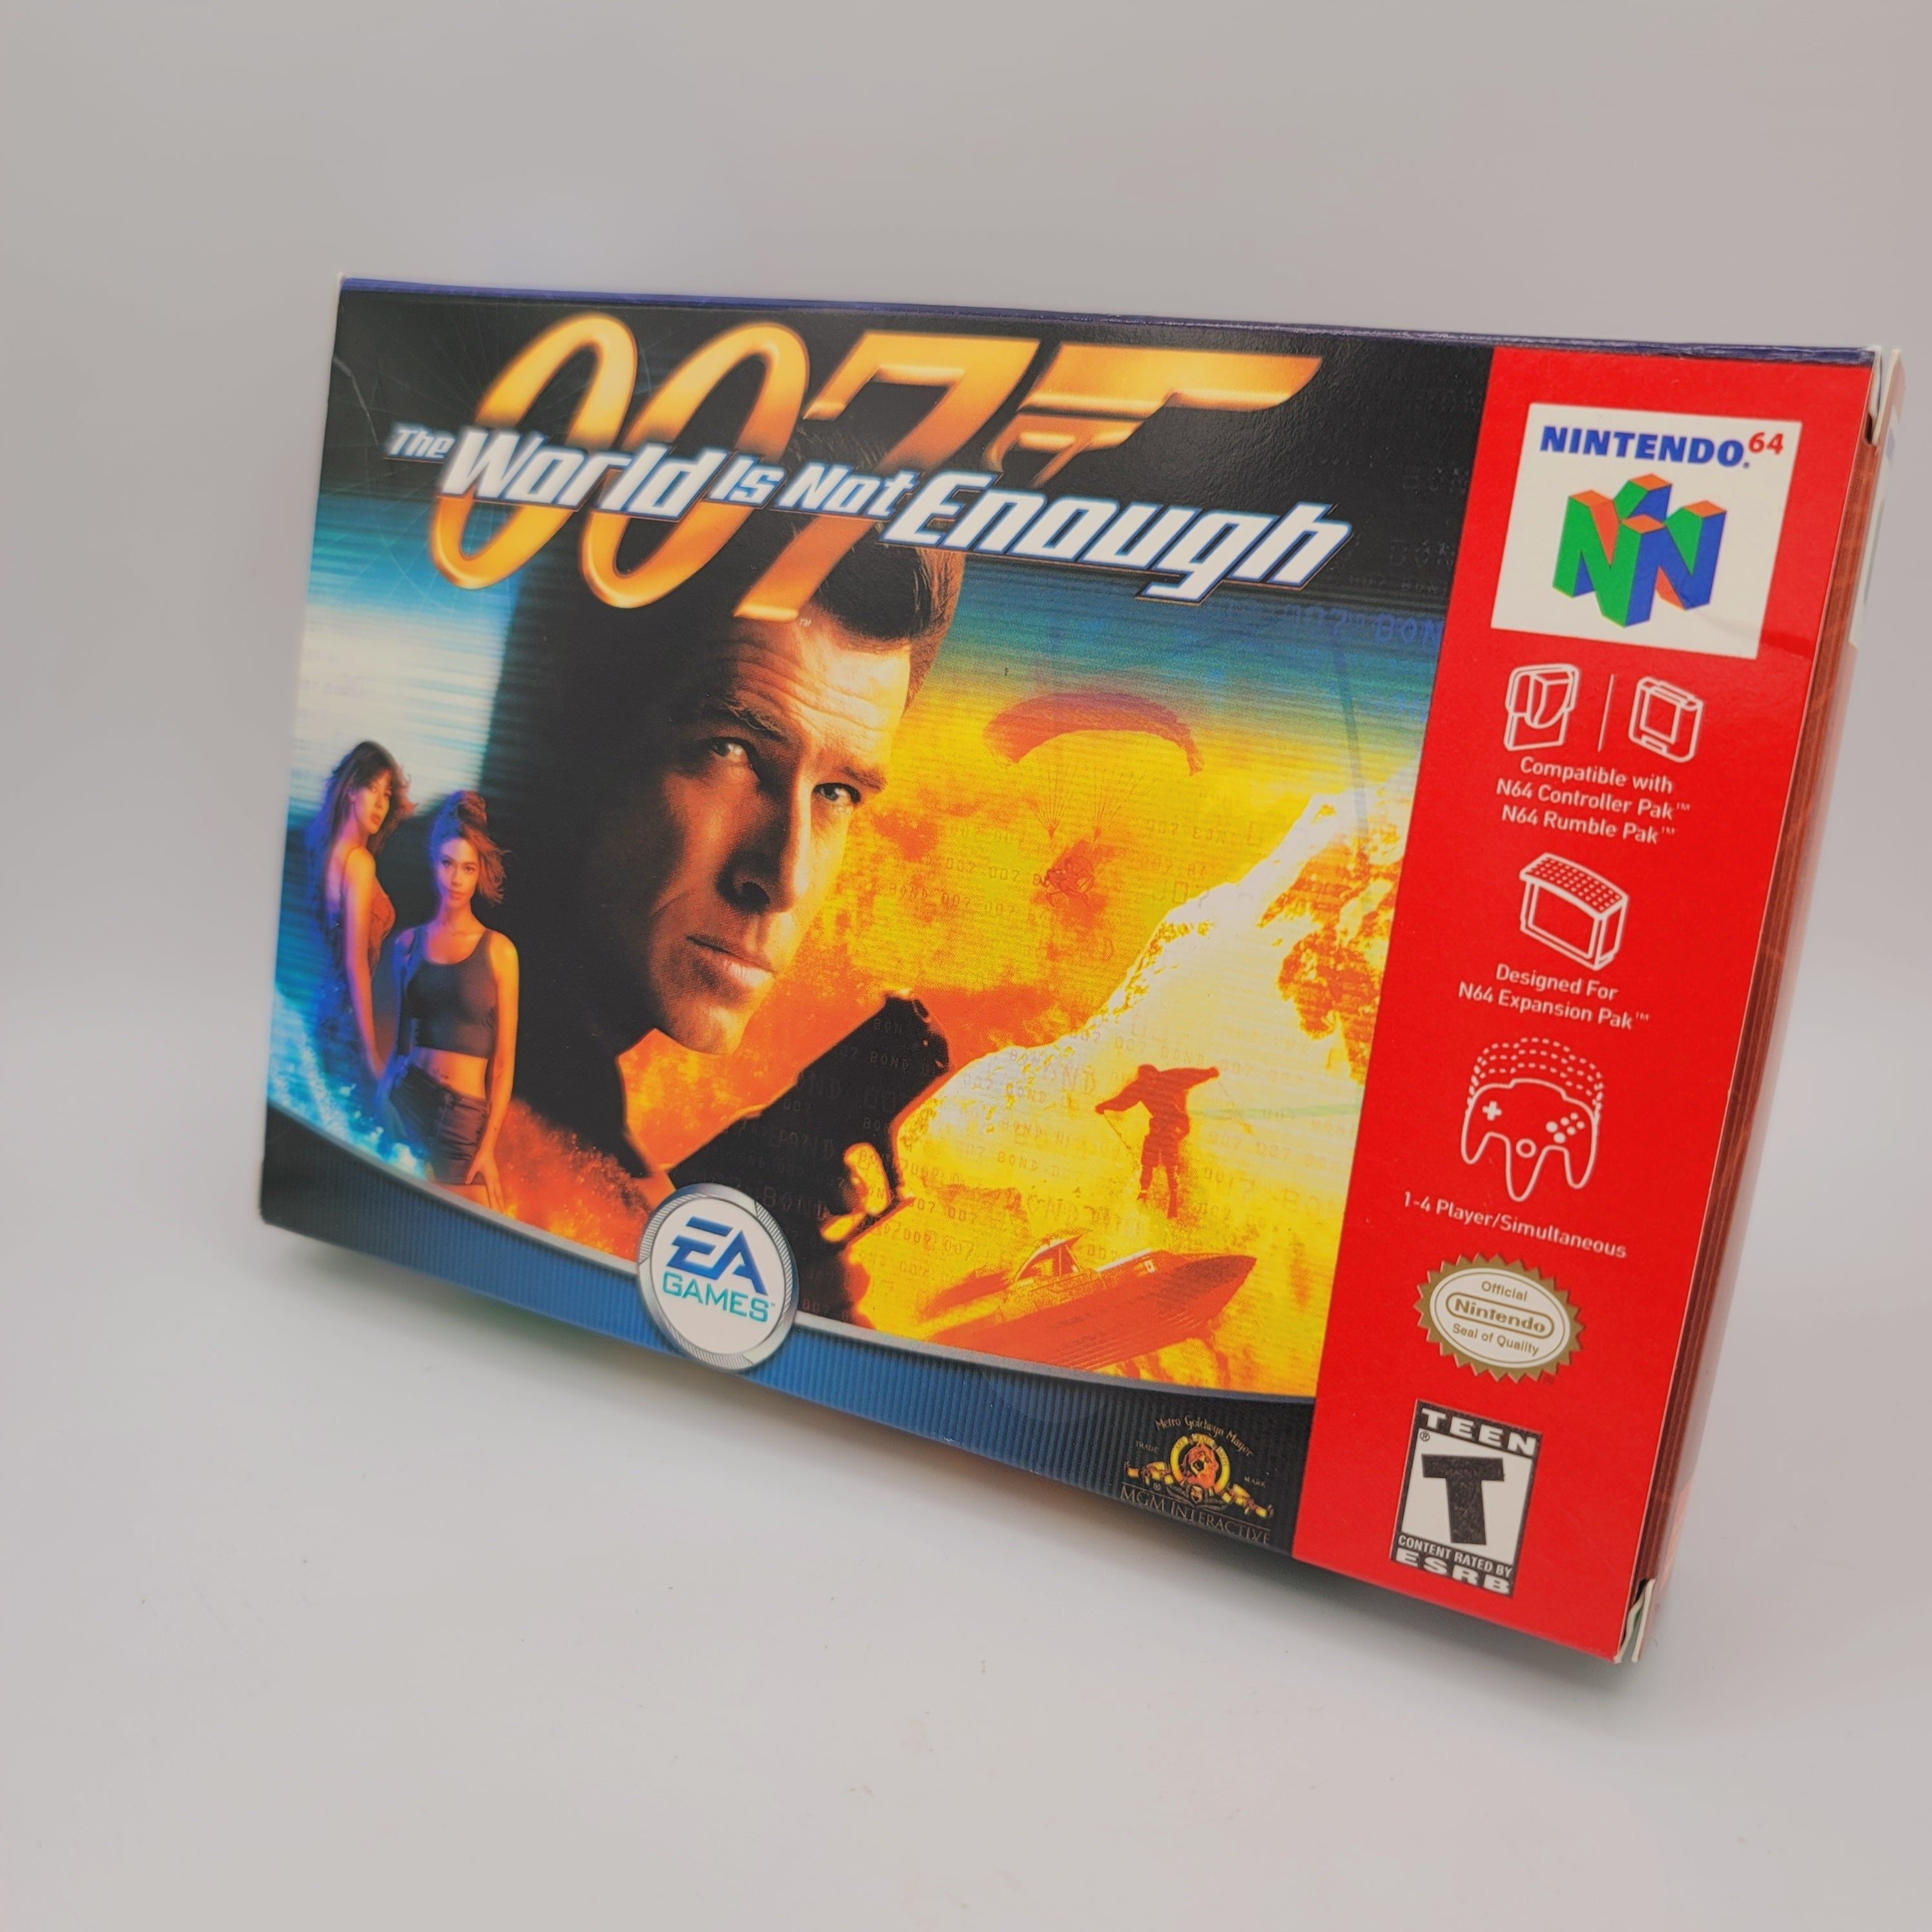 N64 - 007 The World is Not Enough (Complete in Box / A / With Manual)